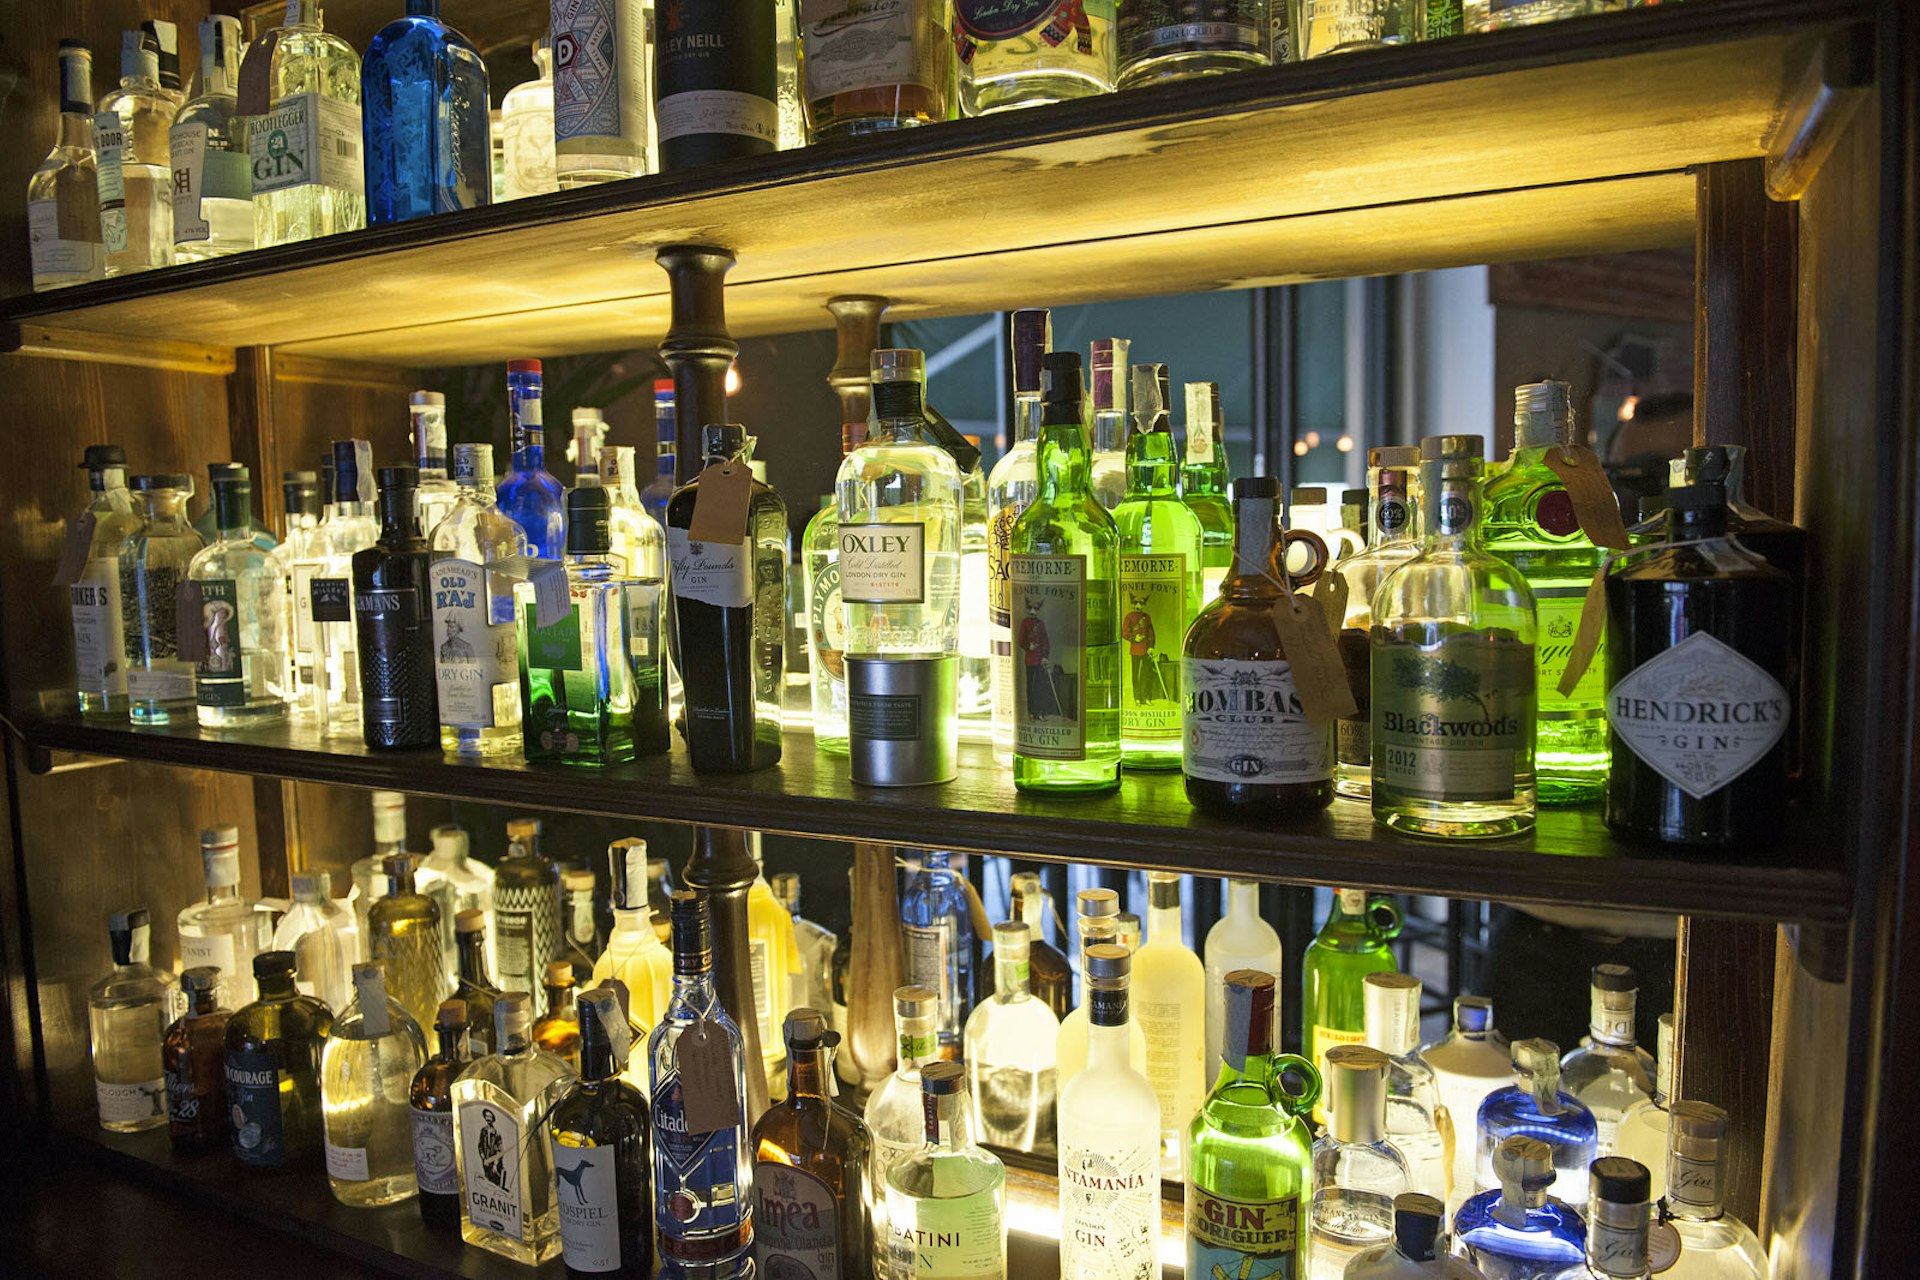 The Botanical Club has an impressive selection of gins